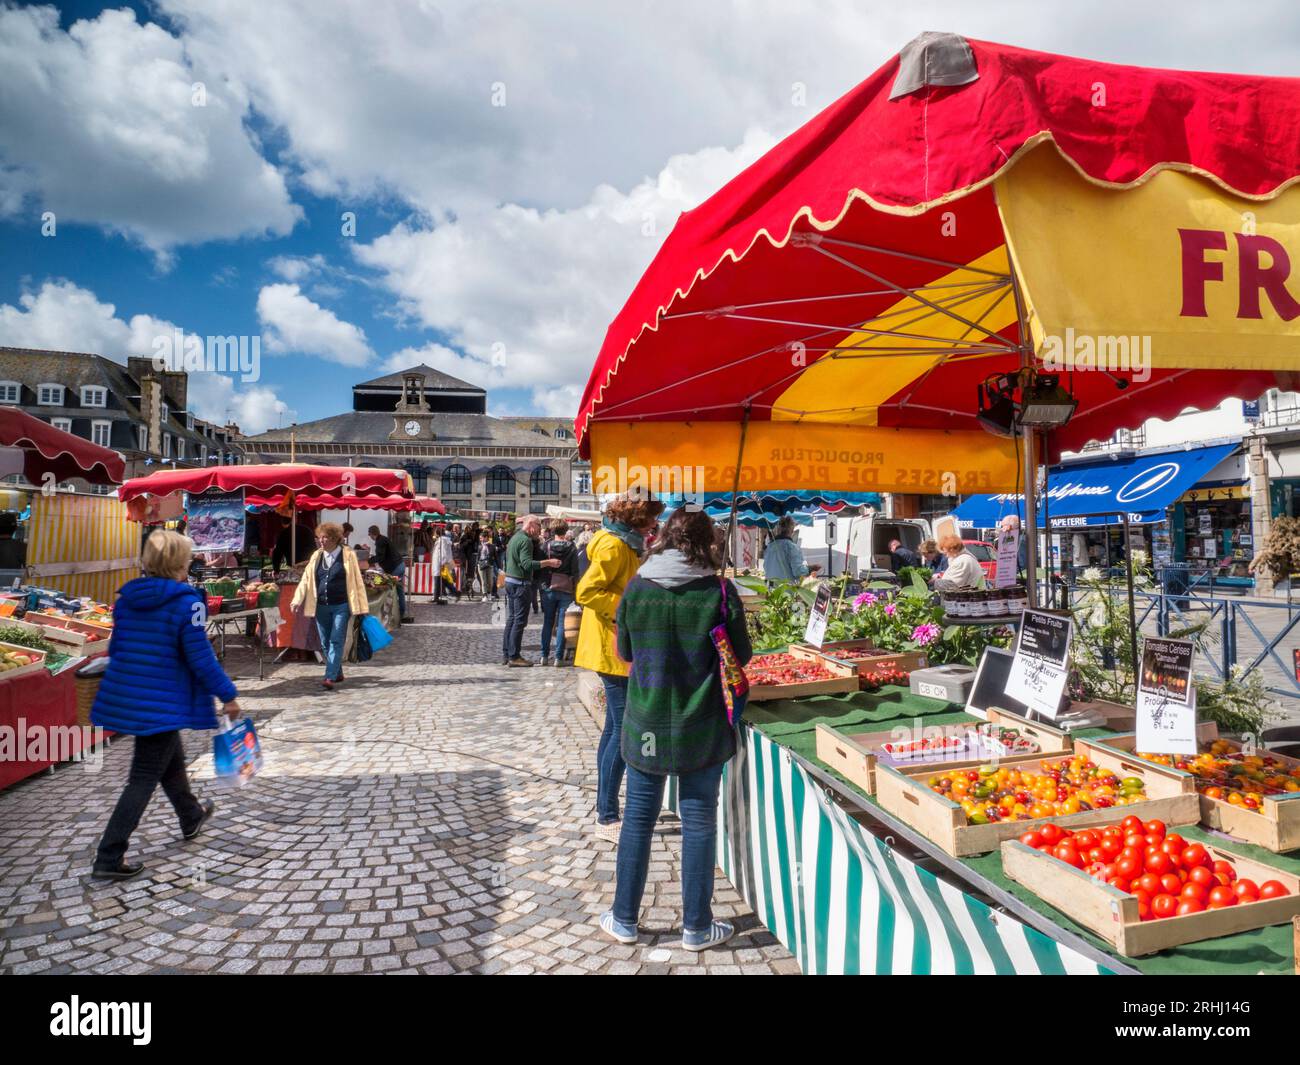 CONCARNEAU MARKET BUSY OUTDOOR Fresh French Produce on display market day in square with covered market in background Concarneau Brittany France Stock Photo